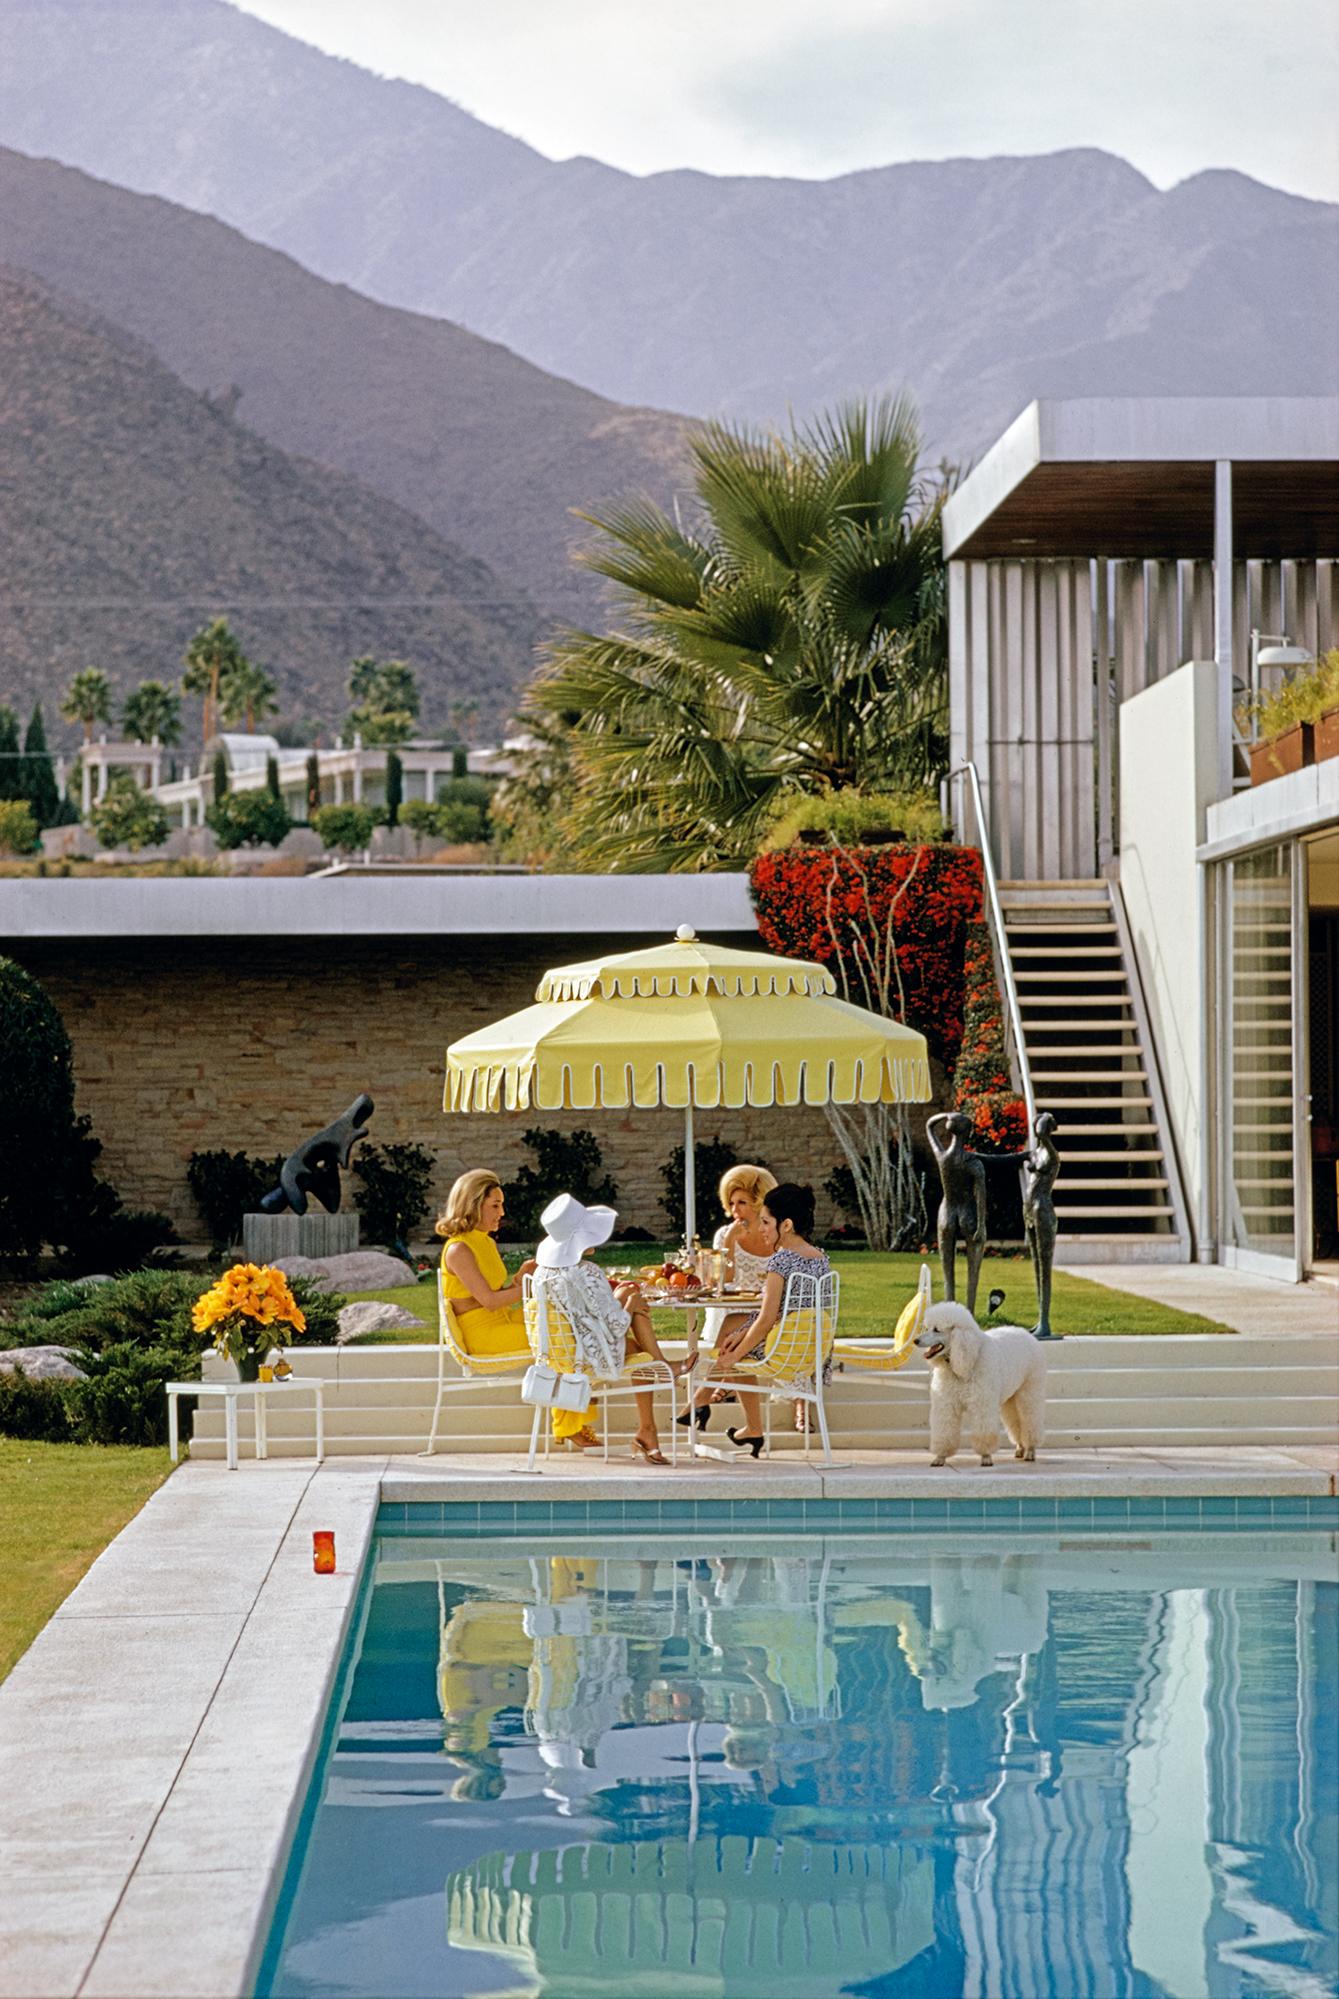 Poolside Friendship
1970 (printed later)
Chromogenic Lambda Print
Estate edition of 150

Nelda Linsk (left, in yellow), wife of art dealer Joseph Linsk with guests by the pool at the Linsk's desert house in Palm Springs, January 1970. At centre,